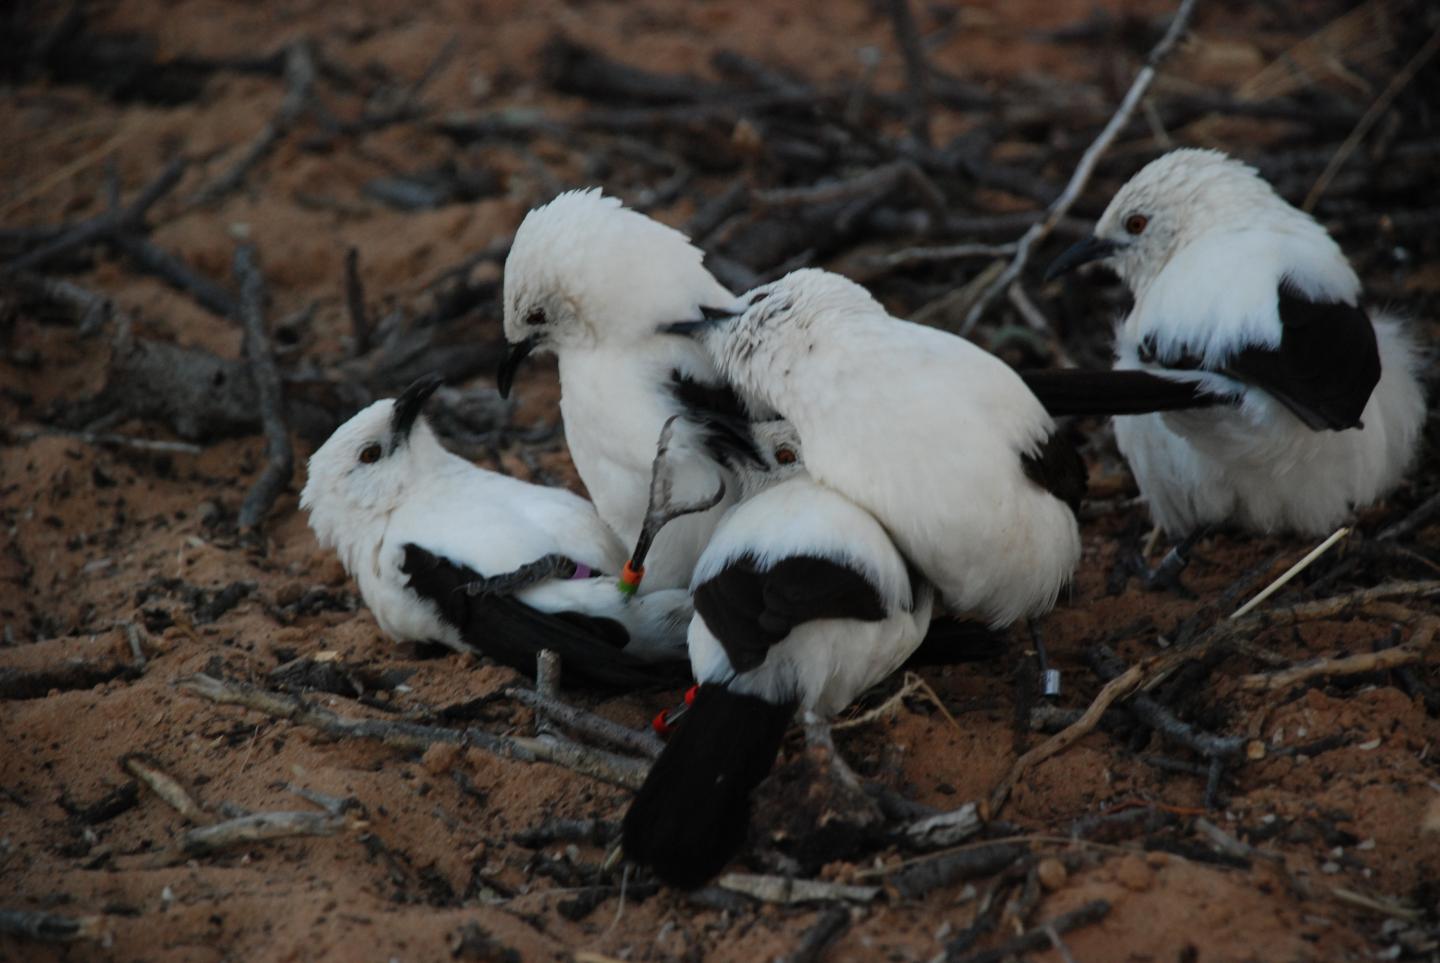 A Group of Southern Pied Babblers Playing Together, Kalahari Desert, South Africa